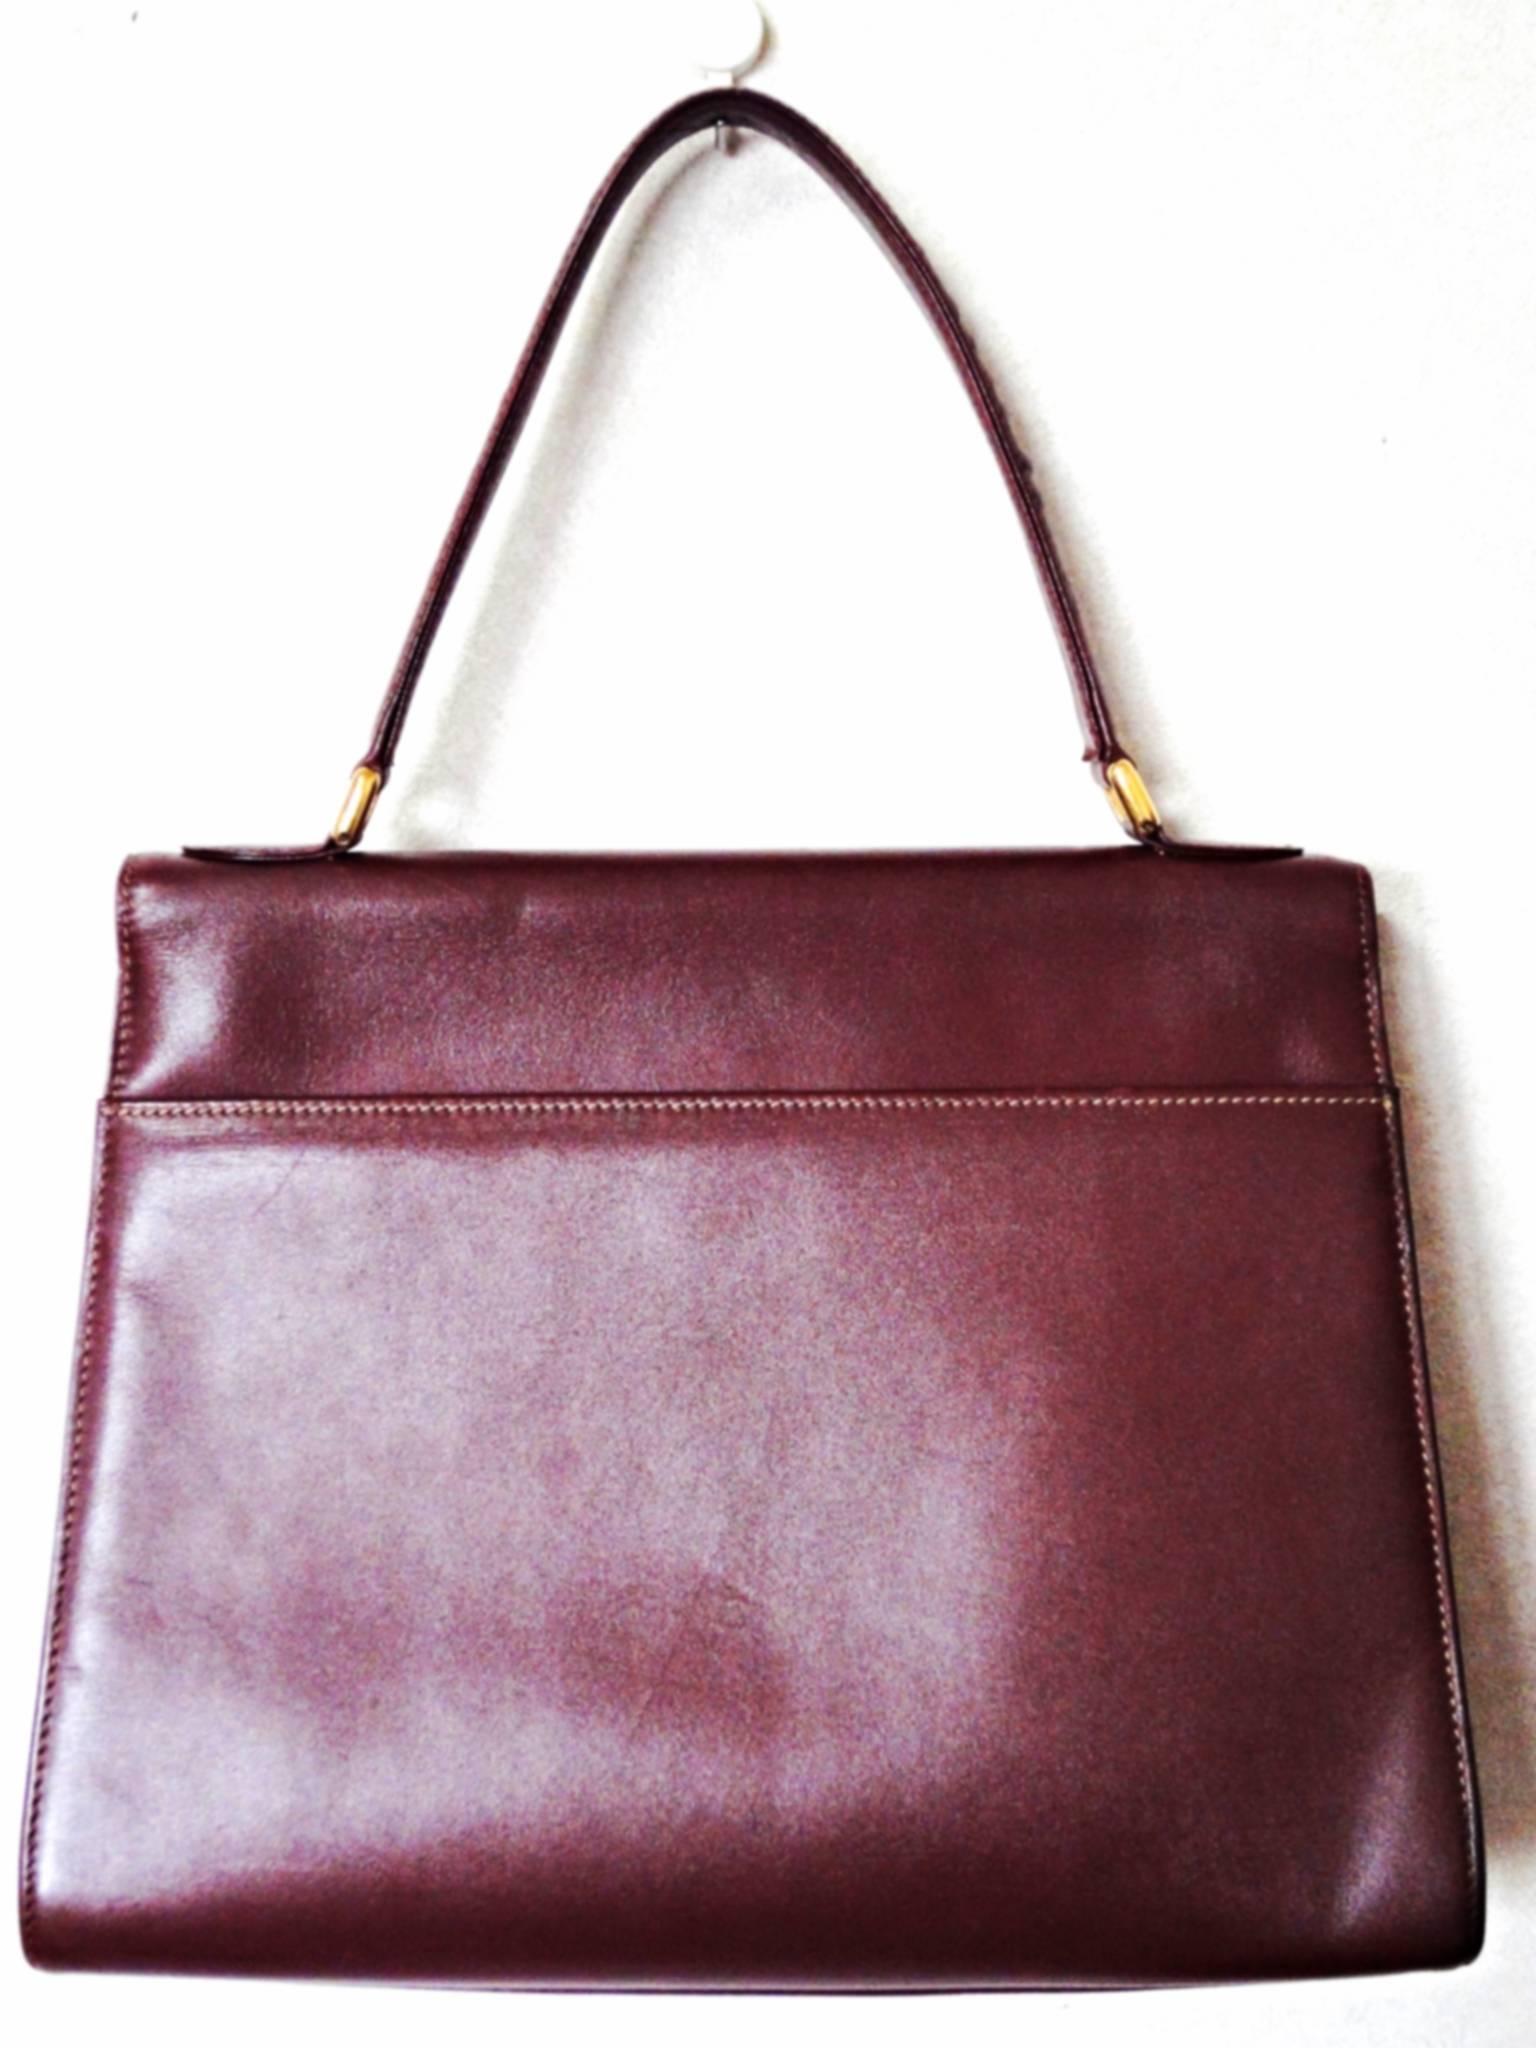 Vintage Cartier kelly style wine leather handbag with gold-tone closure.  les must de cartier collection.

Introducing a vintage wine leather handbag from Cartier, les must de Cartier collection back in the old era.
One of the most popular style.